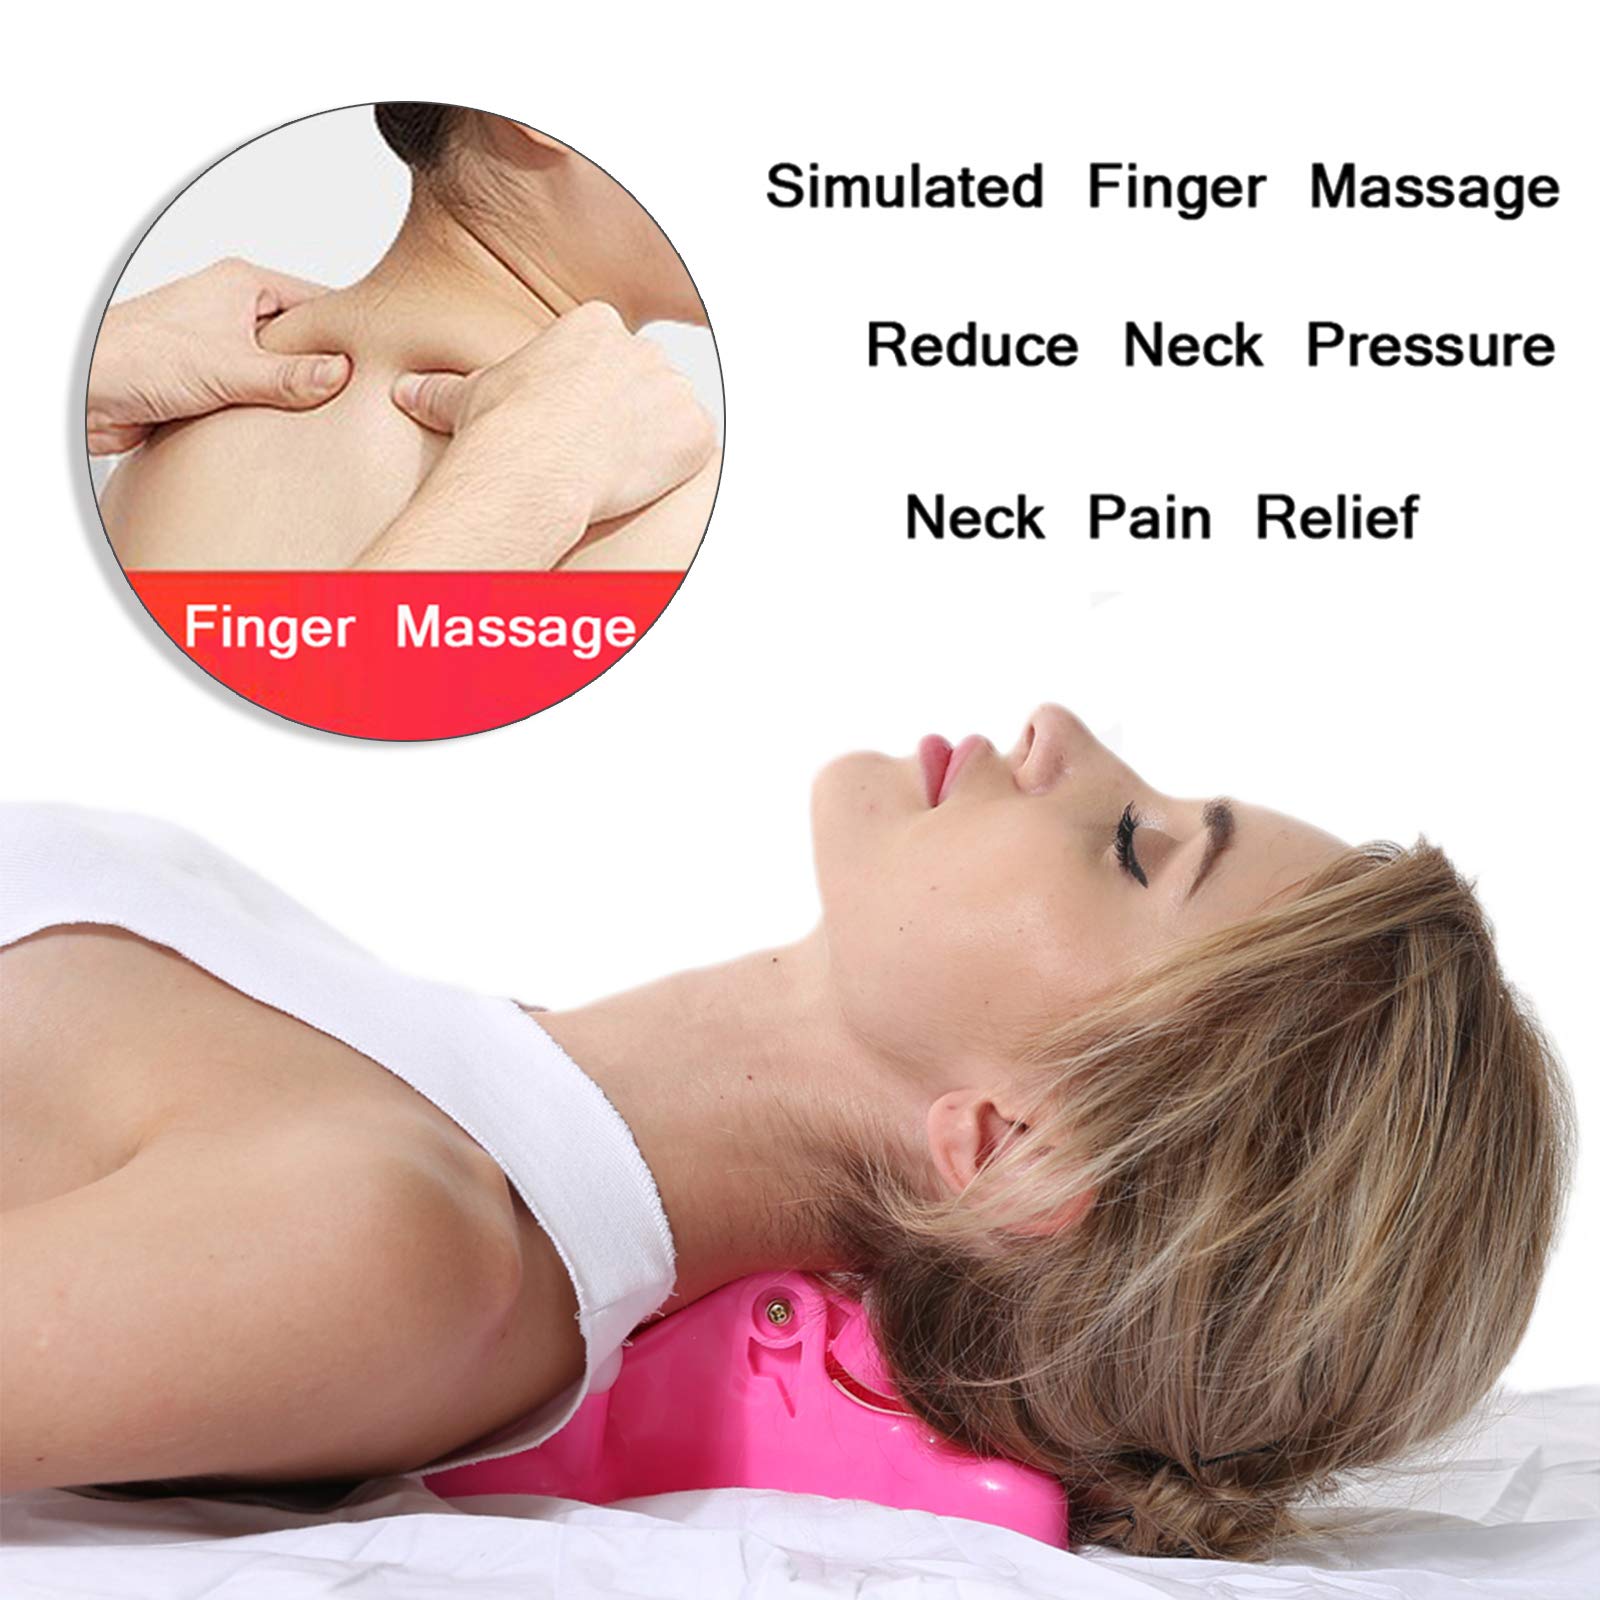 MWELLEWM Cervical Spine Alignment Chiropractic Pillow,Neck and Head Pain Relief Back Massage Traction Device Support Relaxer, Tension Headache Relief, 6 Trigger Point Therapy, Improved Mobility